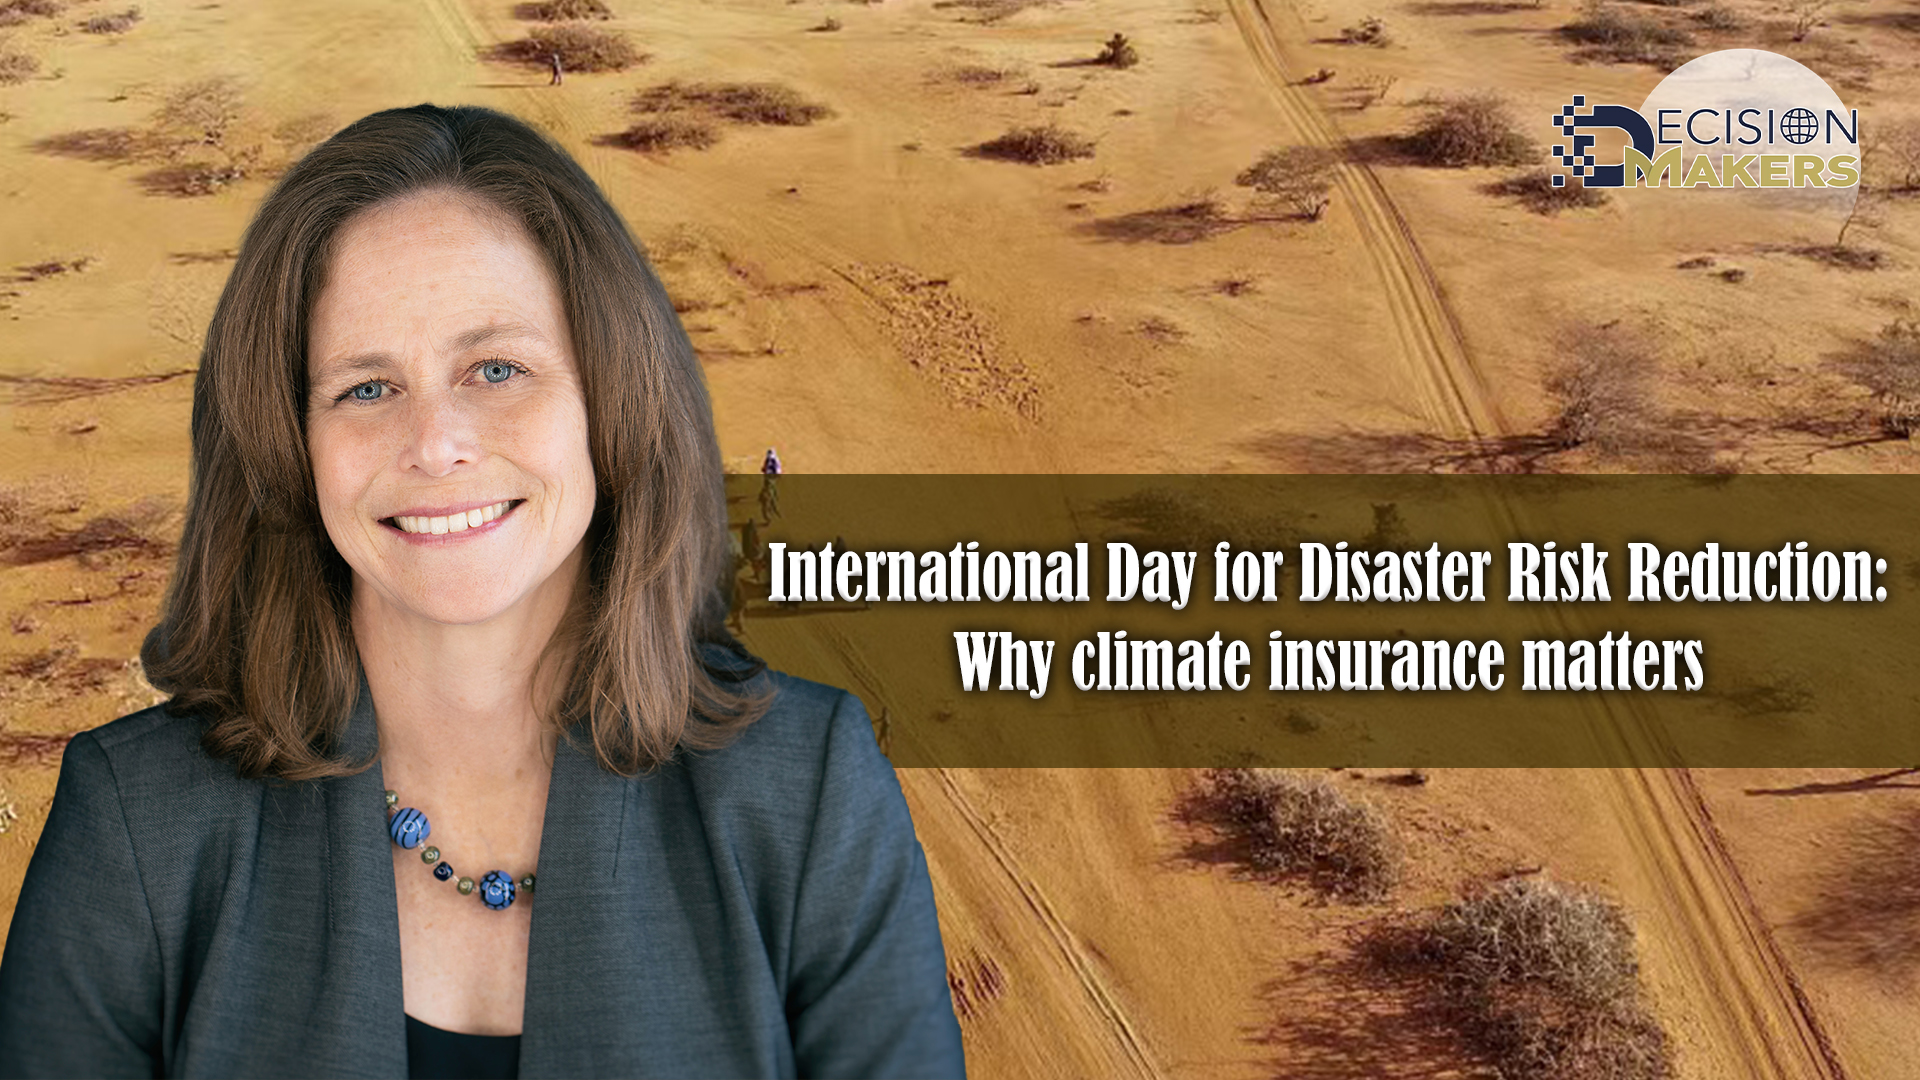 International Day for Disaster Risk Reduction: Why climate insurance matters